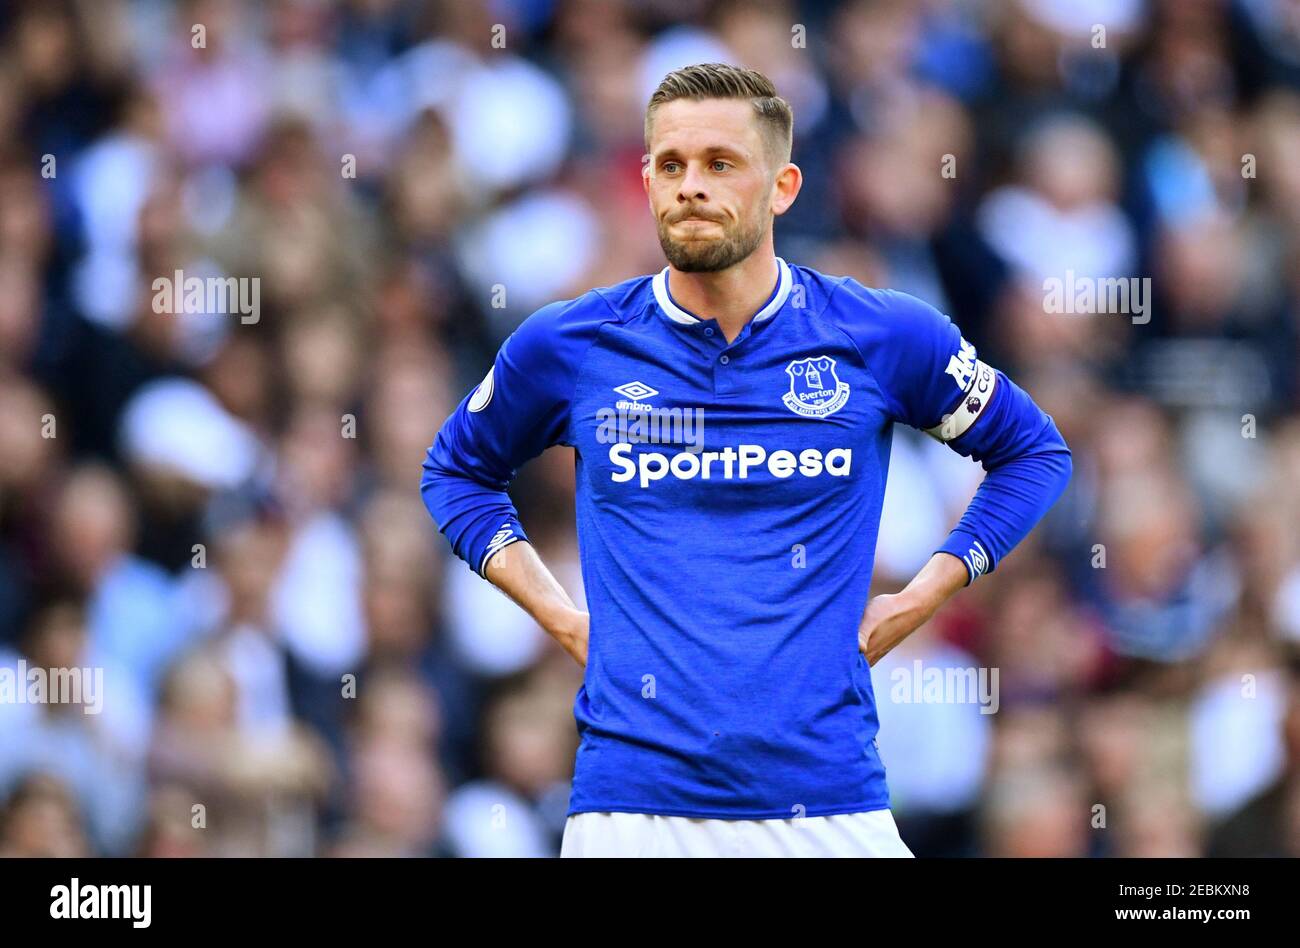 Soccer Football - Premier League - Tottenham Hotspur v Everton - Tottenham Hotspur Stadium, London, Britain - May 12, 2019  Everton's Gylfi Sigurdsson during the match  REUTERS/Dylan Martinez  EDITORIAL USE ONLY. No use with unauthorized audio, video, data, fixture lists, club/league logos or 'live' services. Online in-match use limited to 75 images, no video emulation. No use in betting, games or single club/league/player publications.  Please contact your account representative for further details. Stock Photo